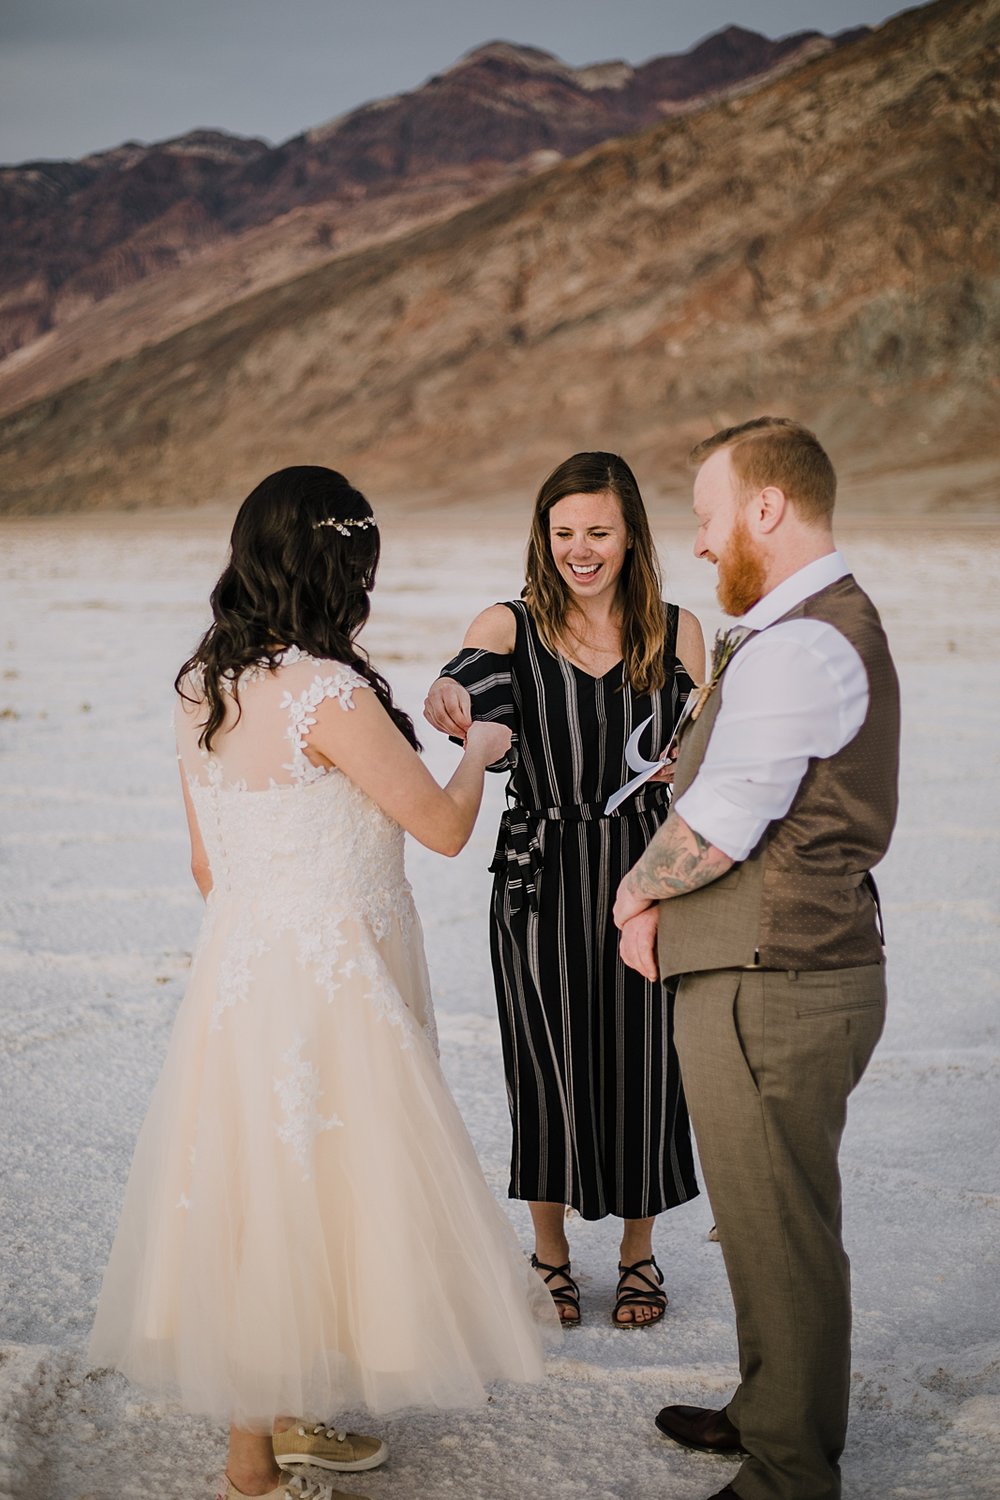 elopement on the salt flats, death valley national park elopement, elope in death valley, badwater basin elopement, hiking in death valley national park, sunset at badwater basin